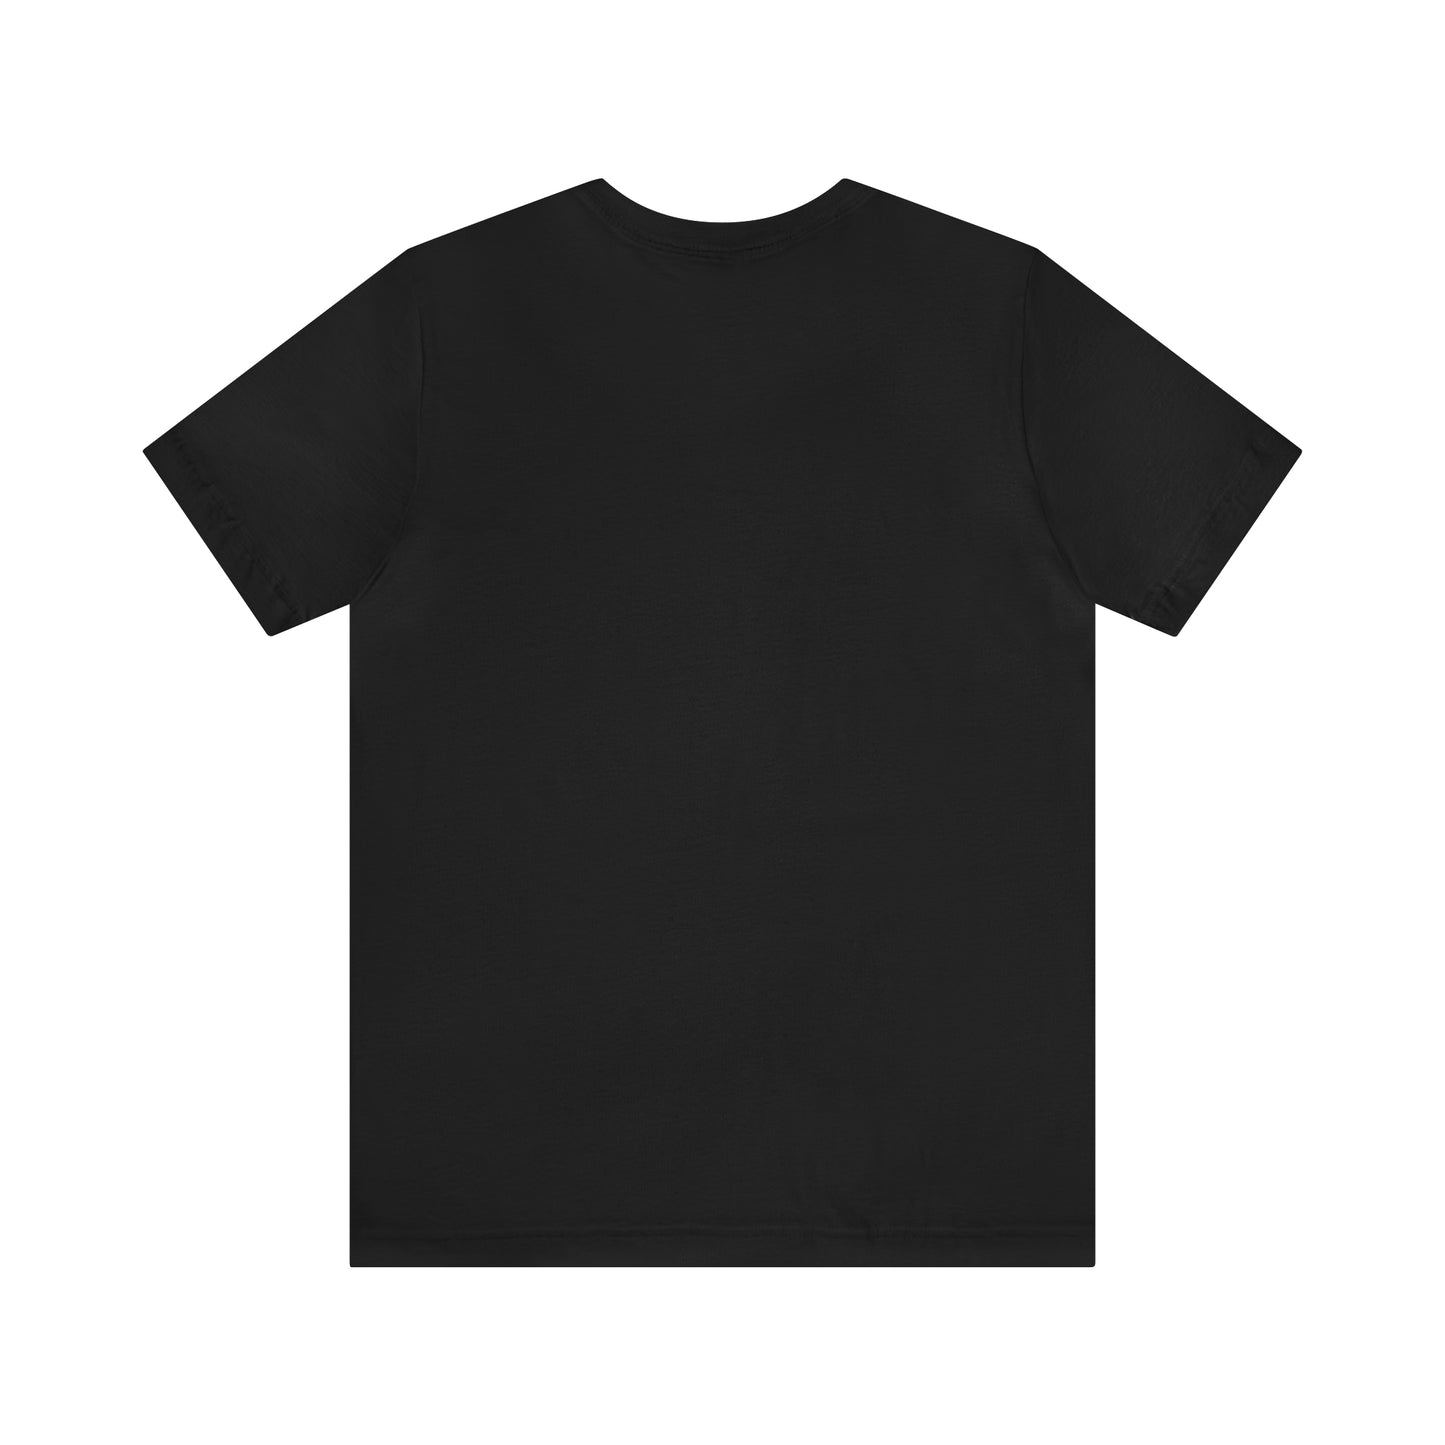 Stiky X Frequency Short Sleeve Tee